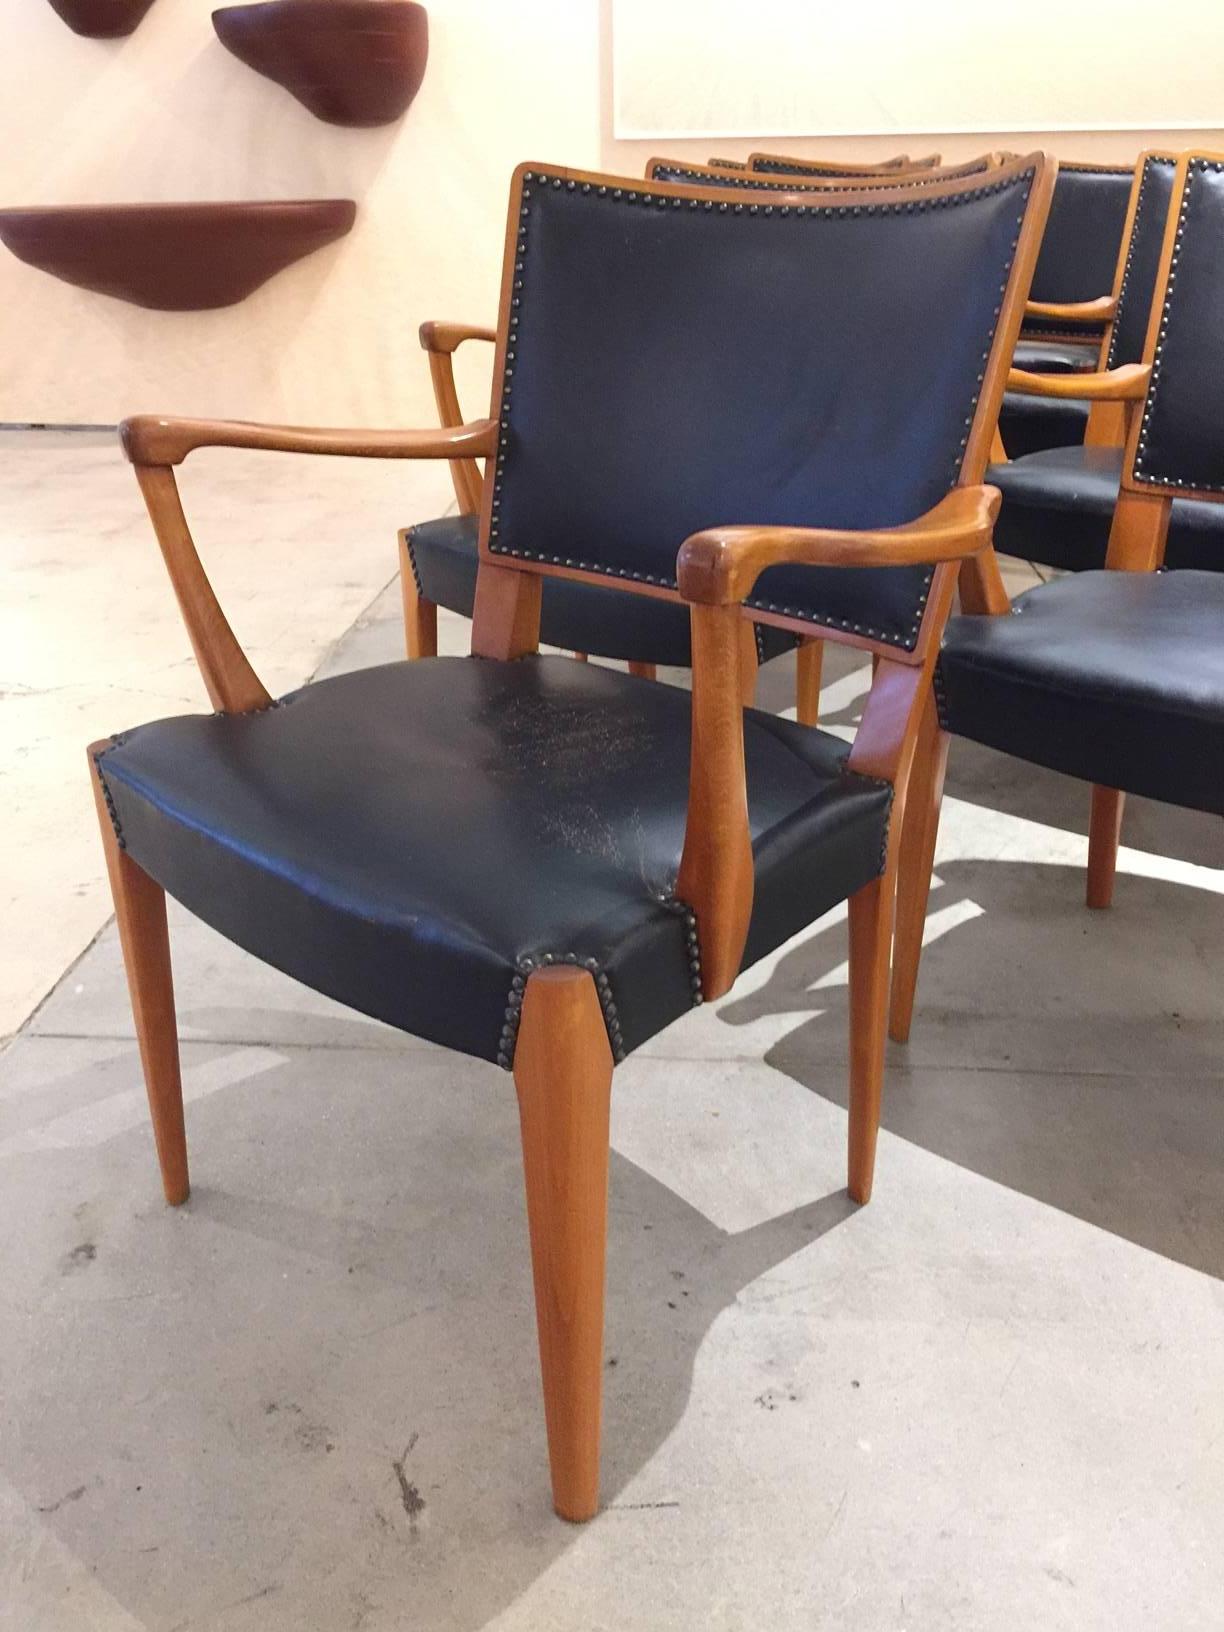 Set of 15 armchairs attributed to Axel Einar Hjorth. From the cabinetmaker shop at NK, Sweden, circa 1940.
Made from steamed European beech by NK
Original leather with brass tacks in very good condition.
Dimensions:
32" H x 23.75" W x